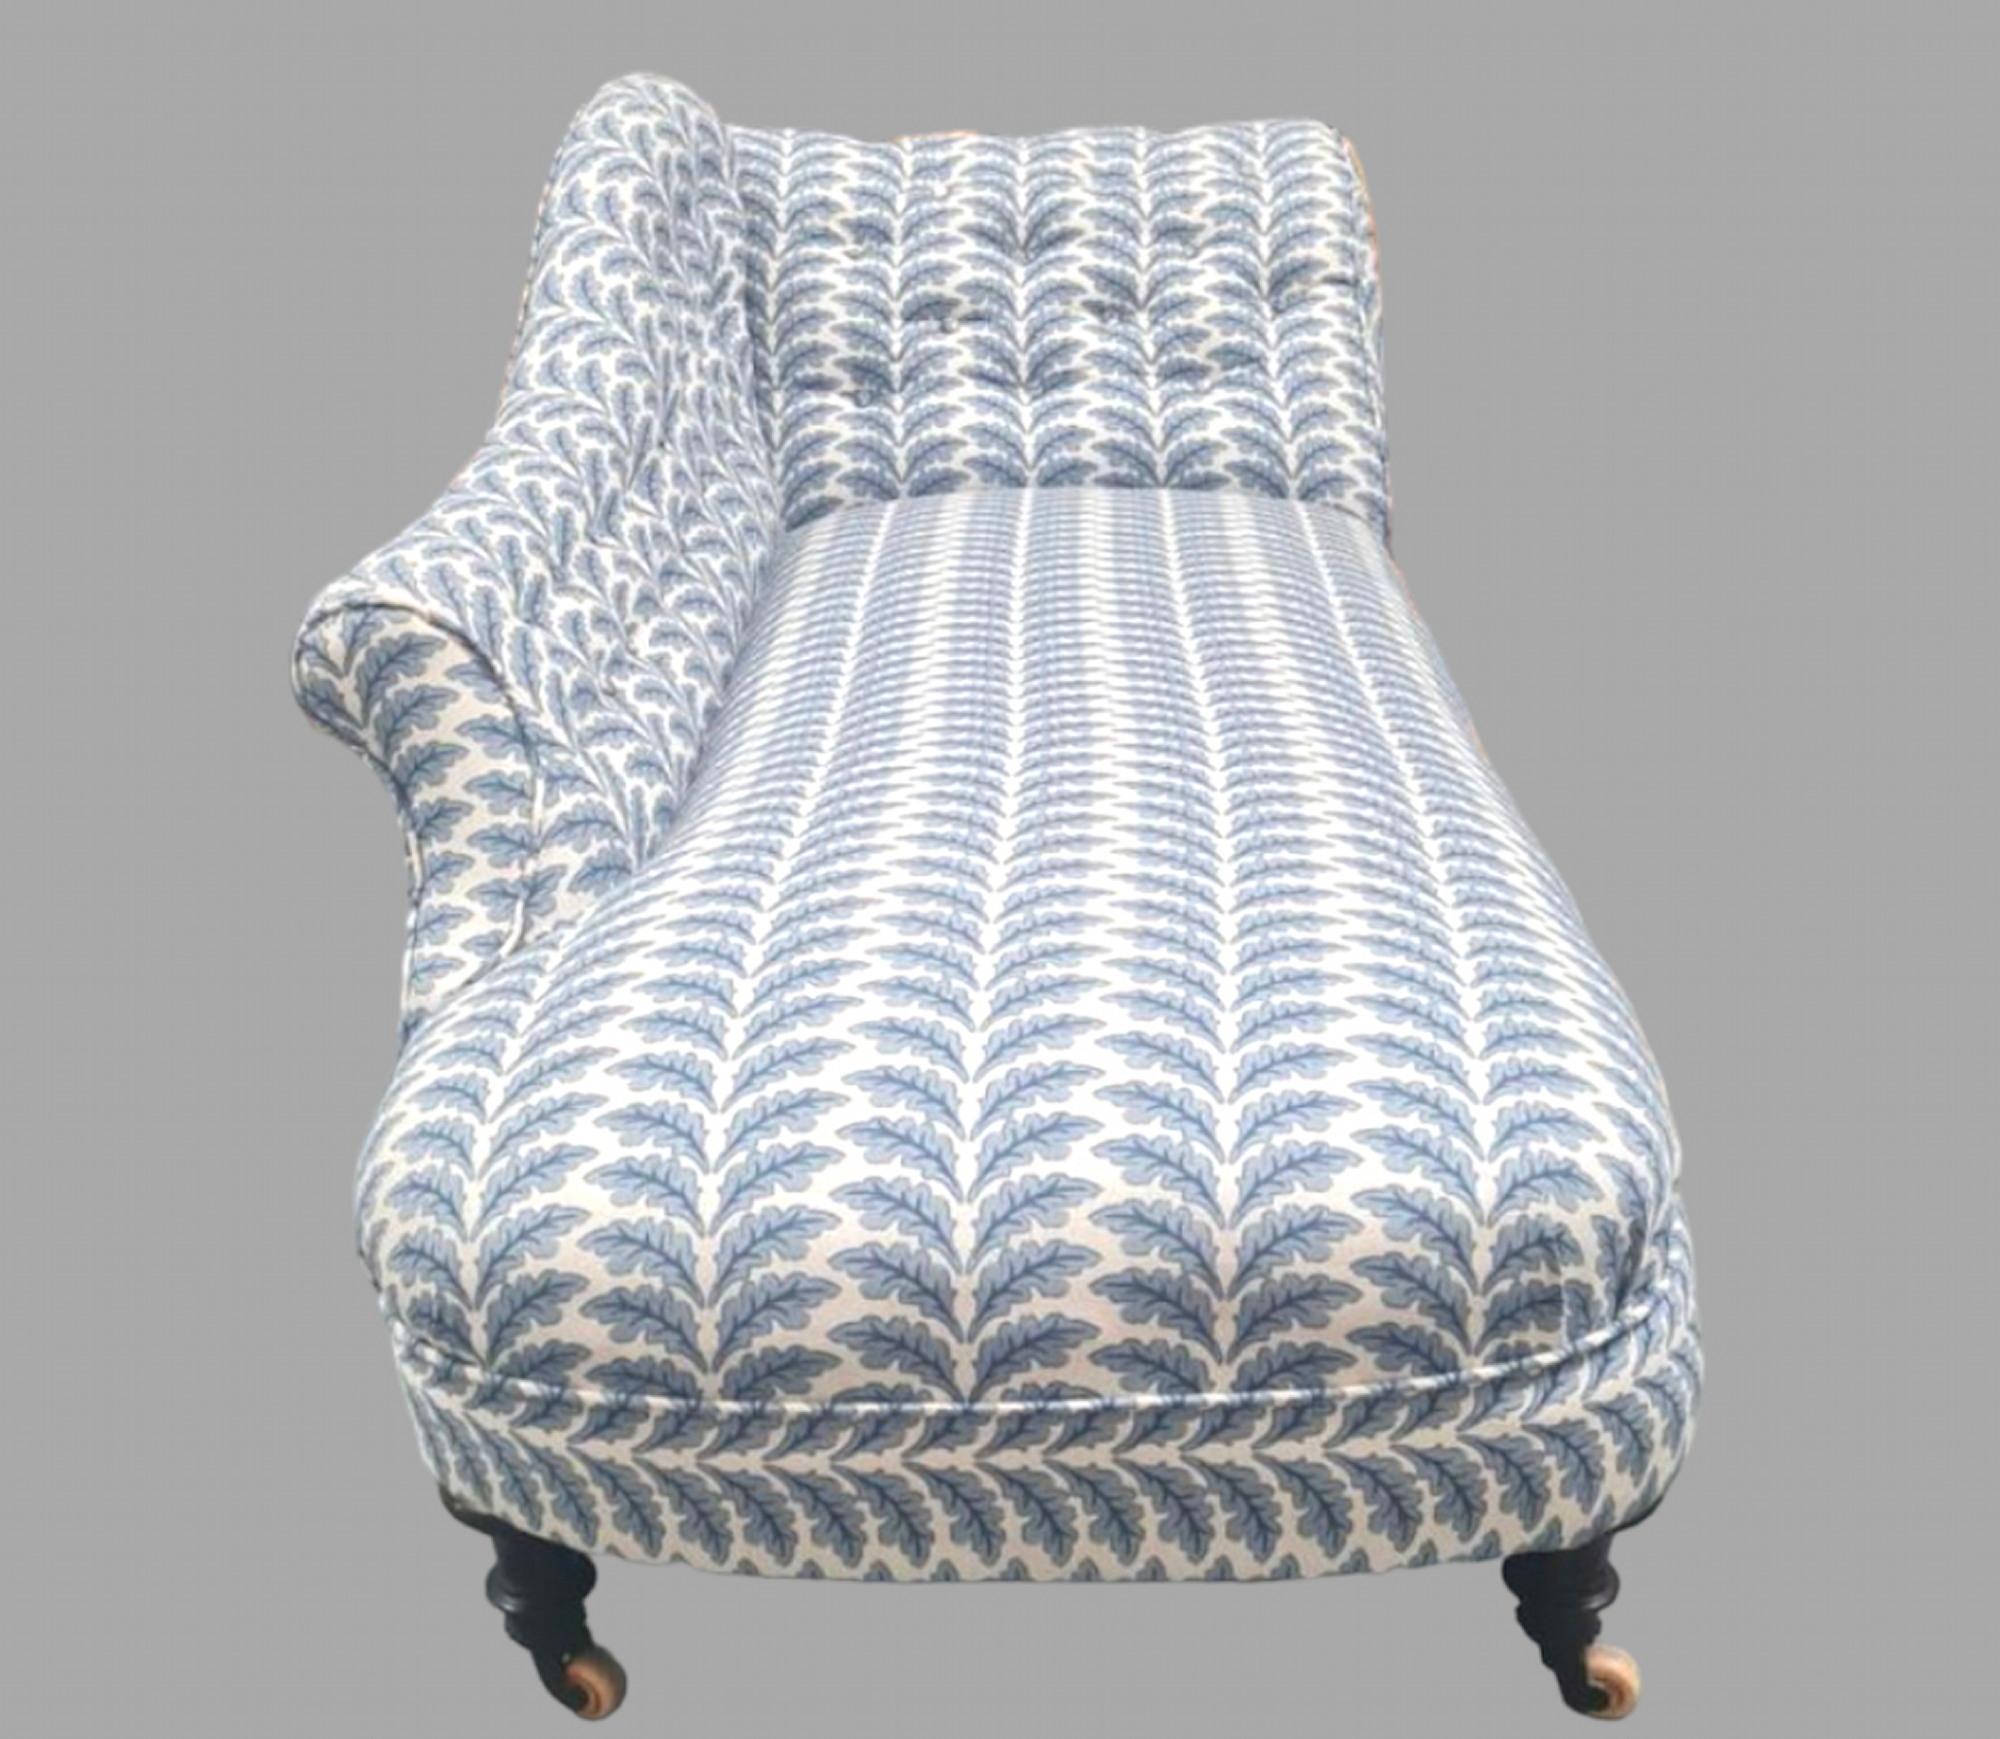 A very Attractive Button Back Victorian Chaise Longue on turned legs and castors that has been professionally reupholstered in a beautiful linen.